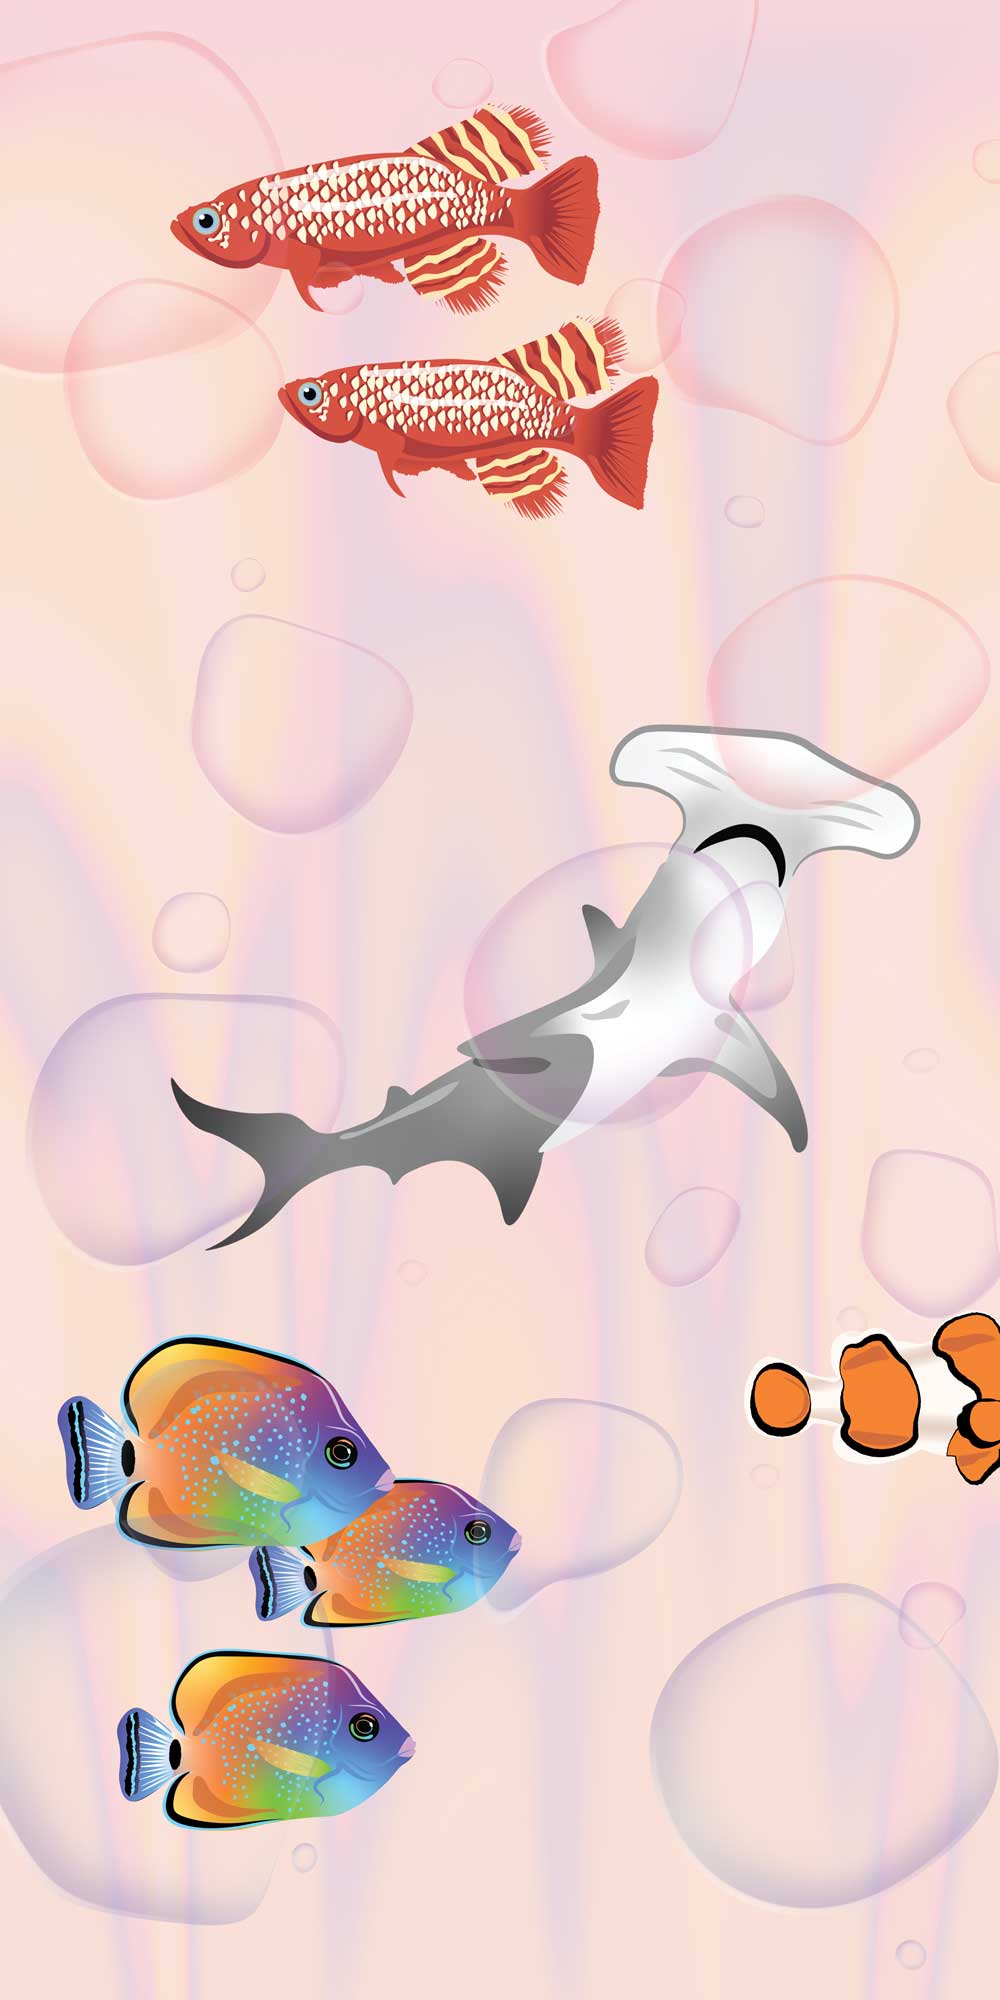 Illustrated fish and bubbles in front of pastel swirl background